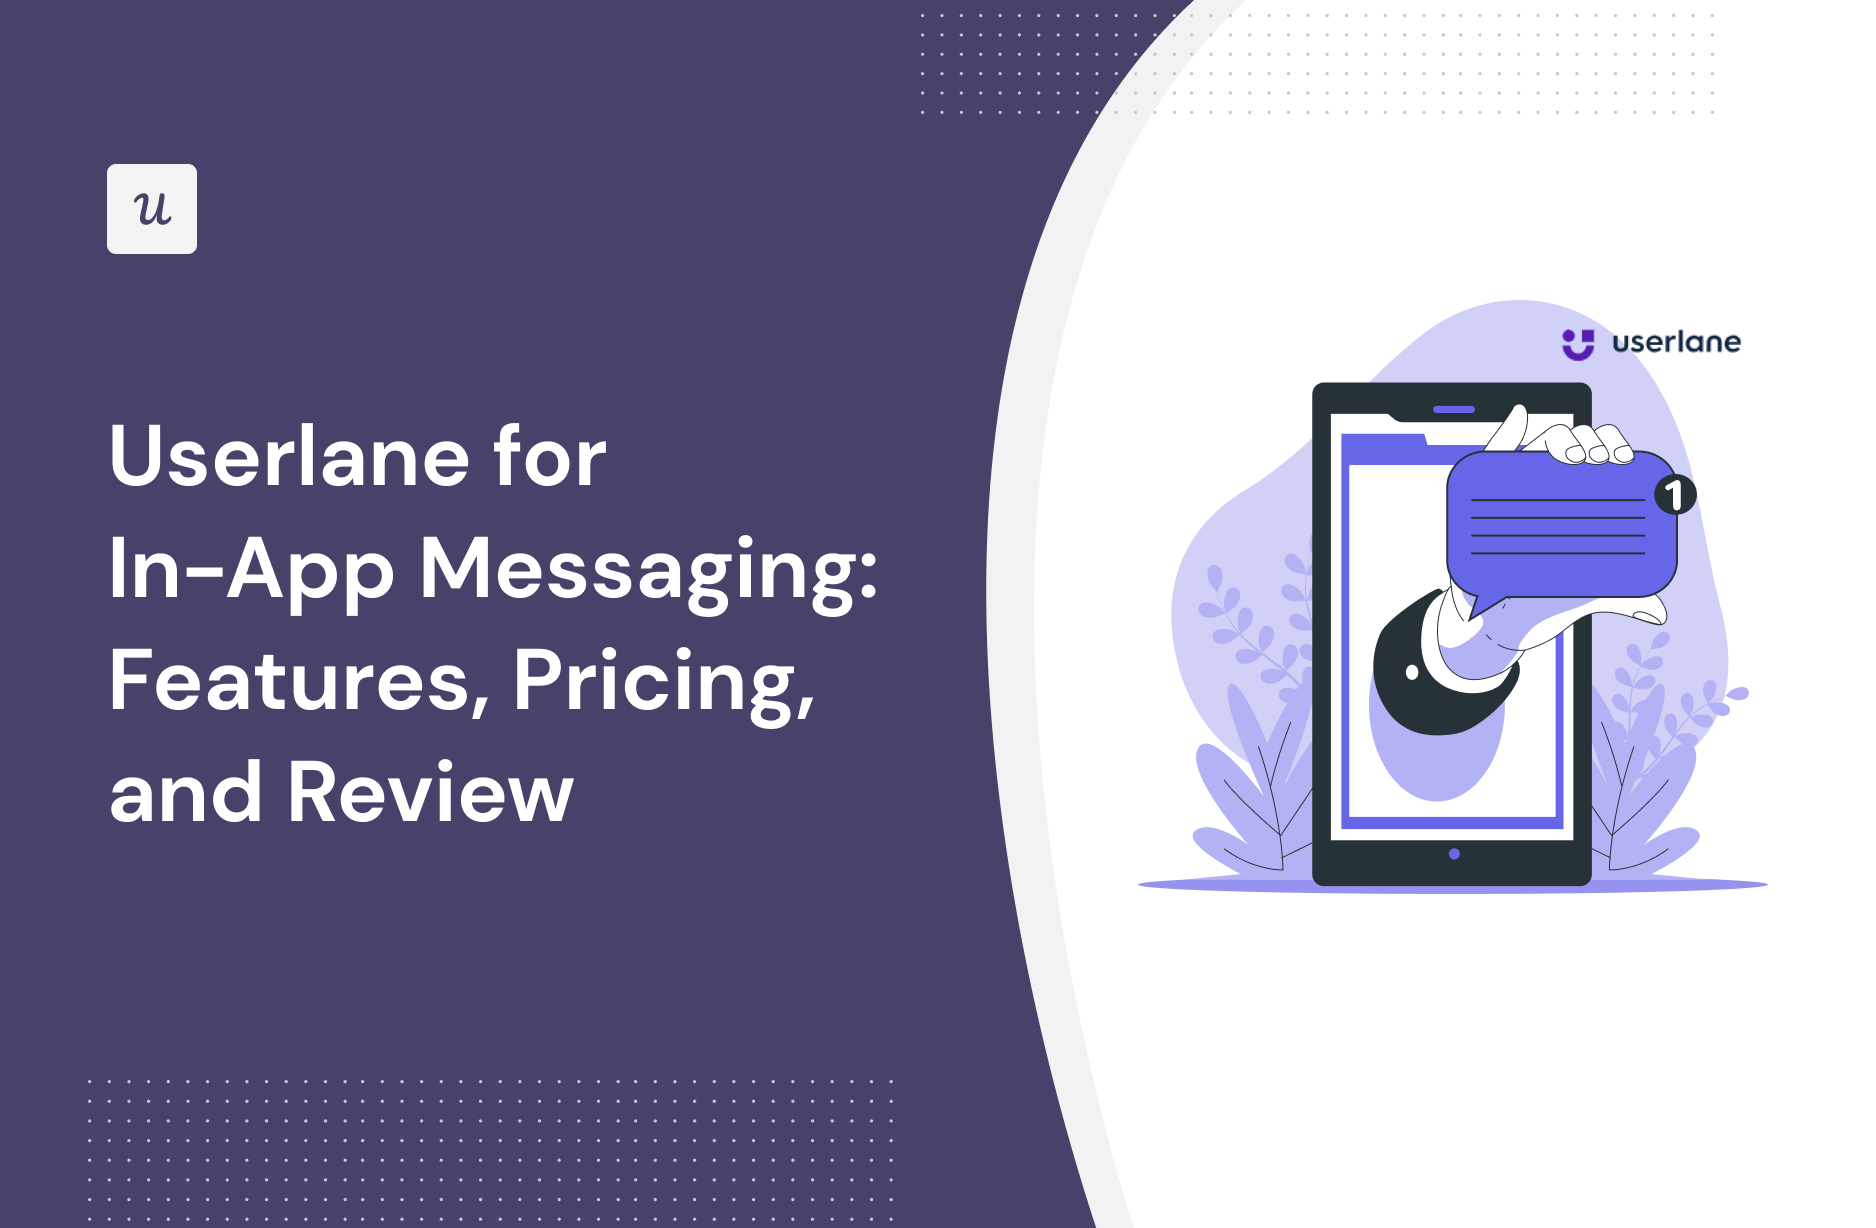 Userlane for In-app messaging: Features, Pricing, and Review